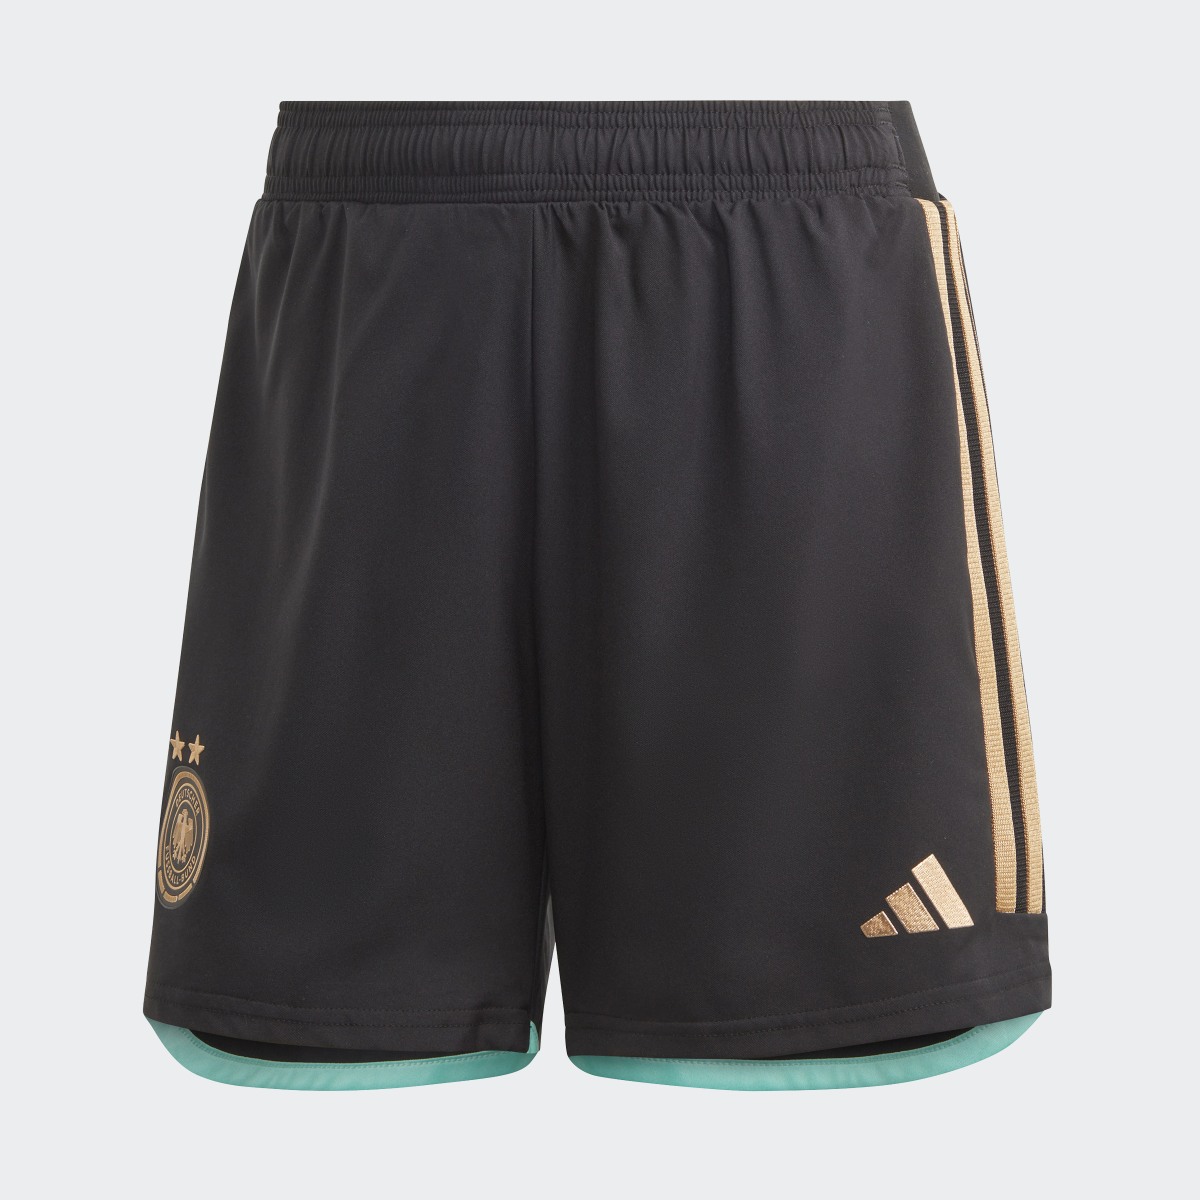 Adidas Germany Women's Team 23 Away Authentic Shorts. 4